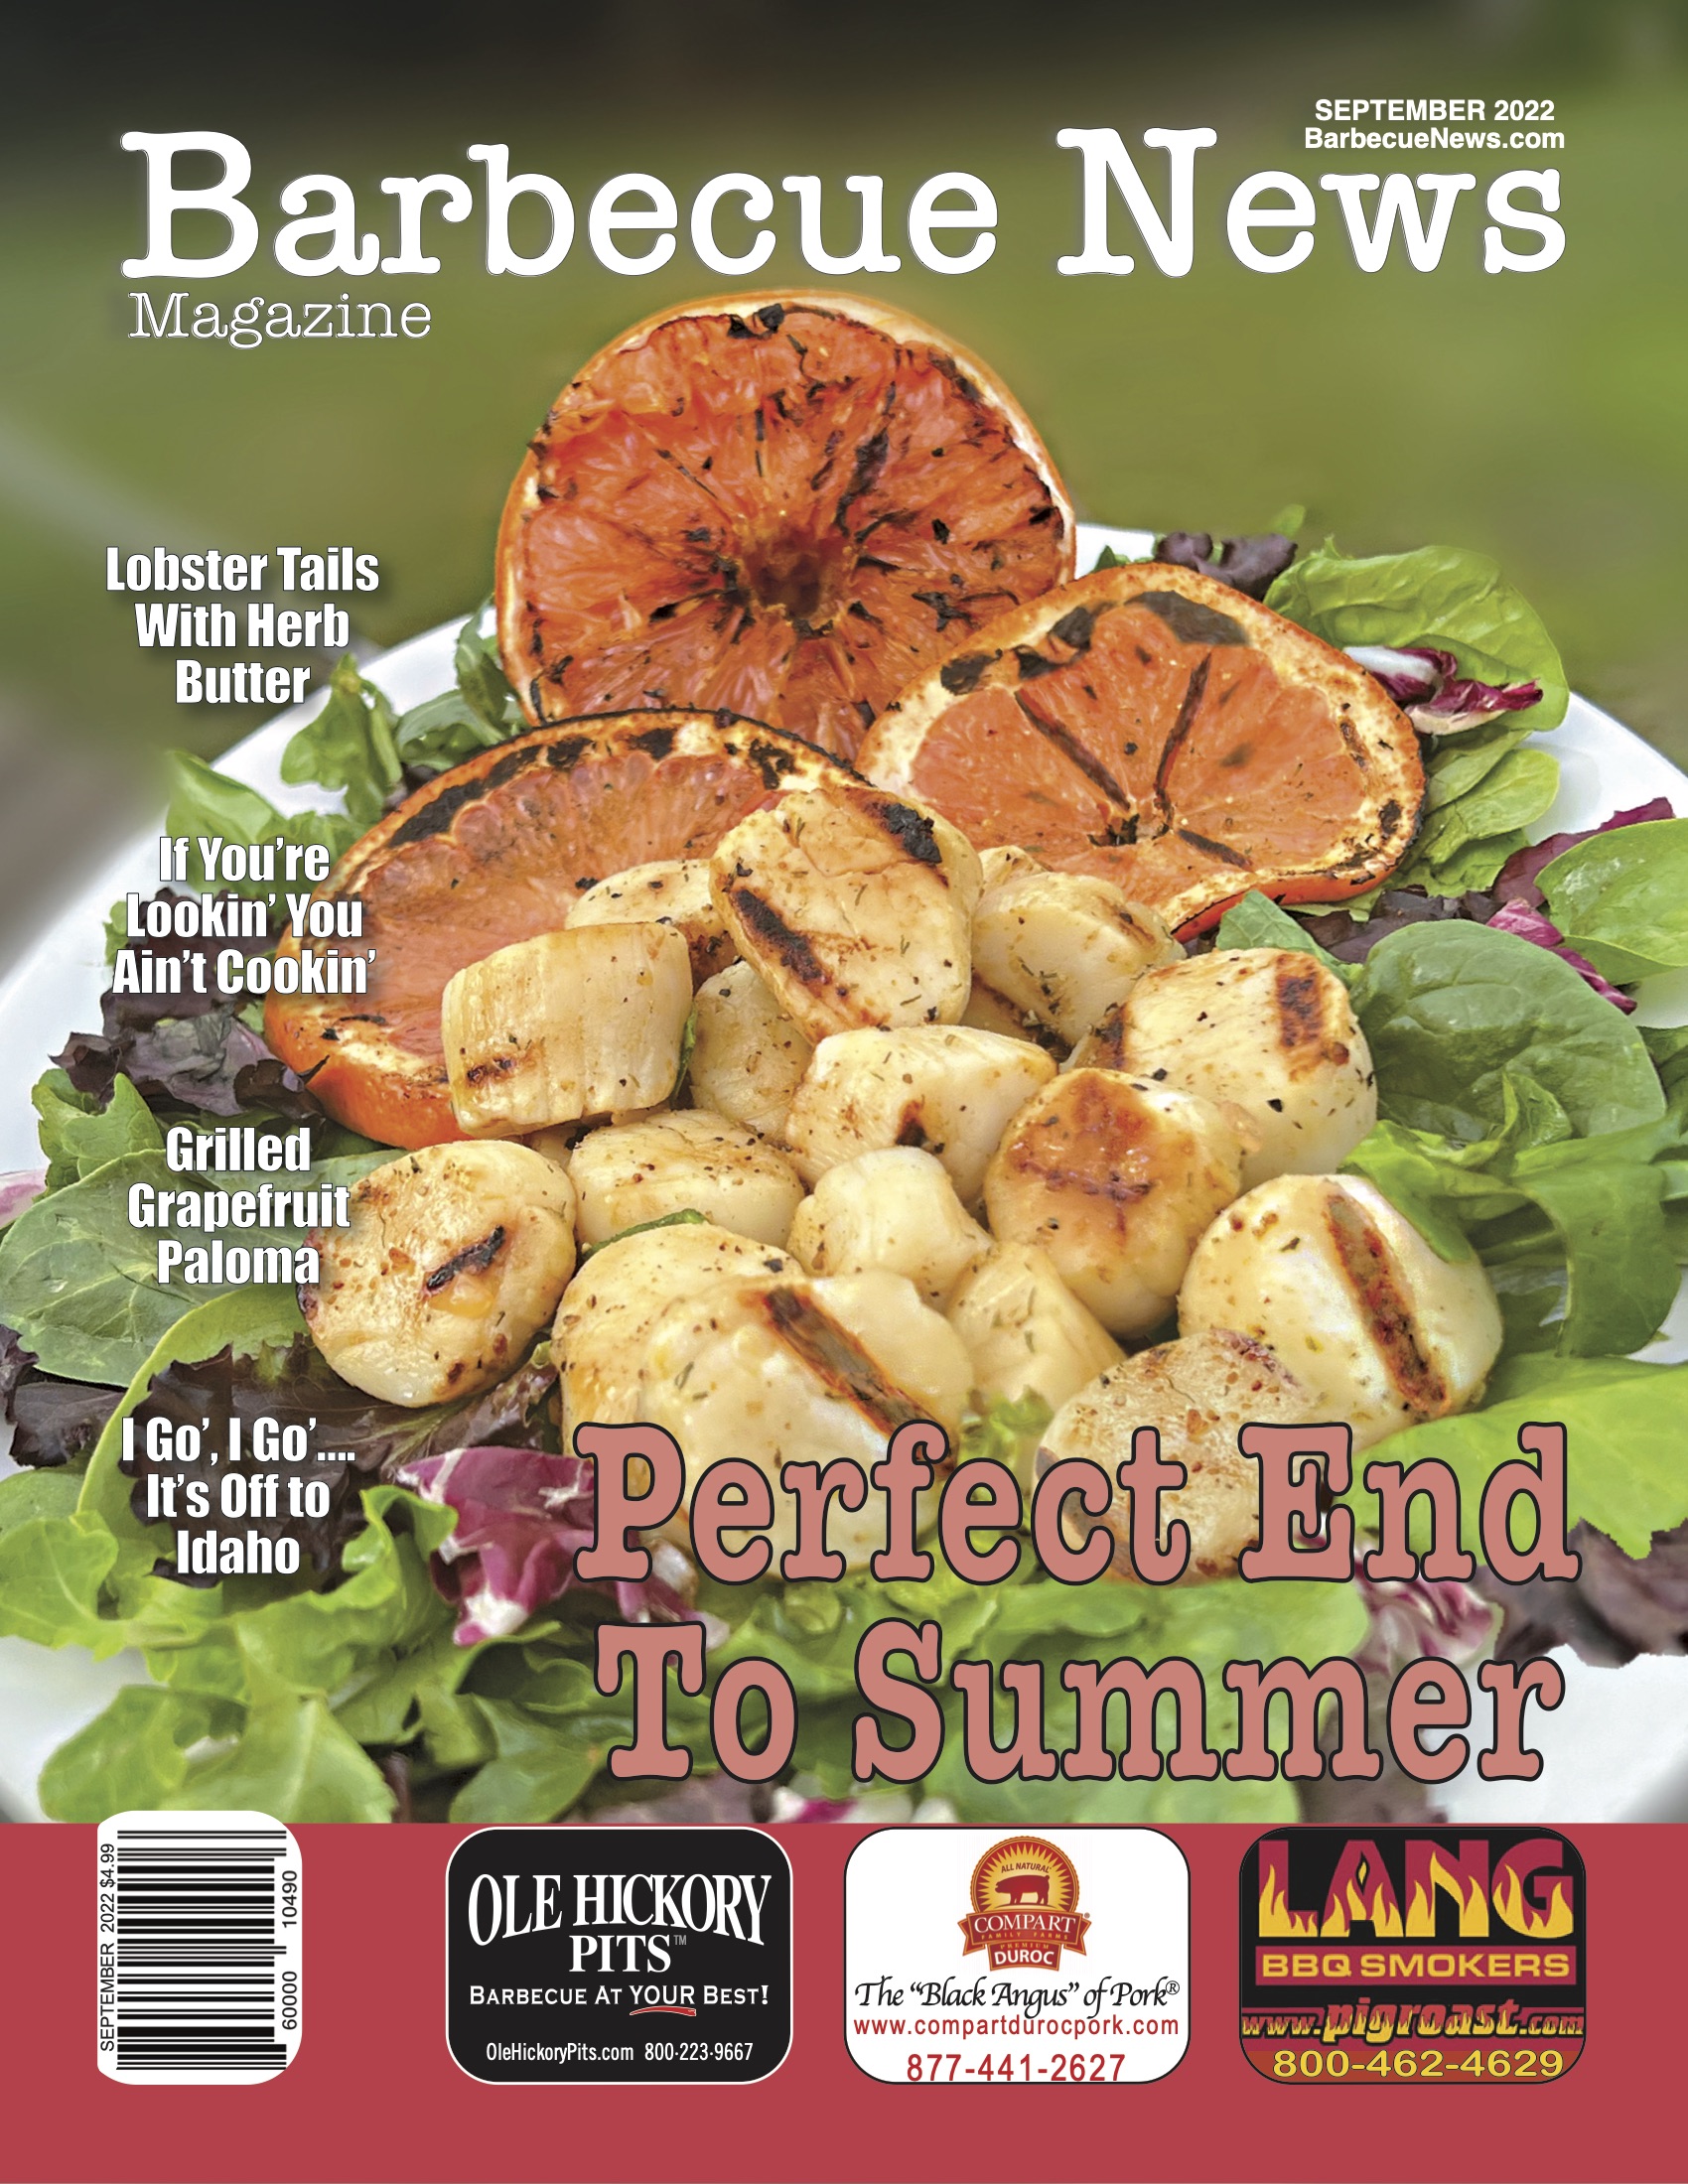 Barbecue News August 2022 Issue